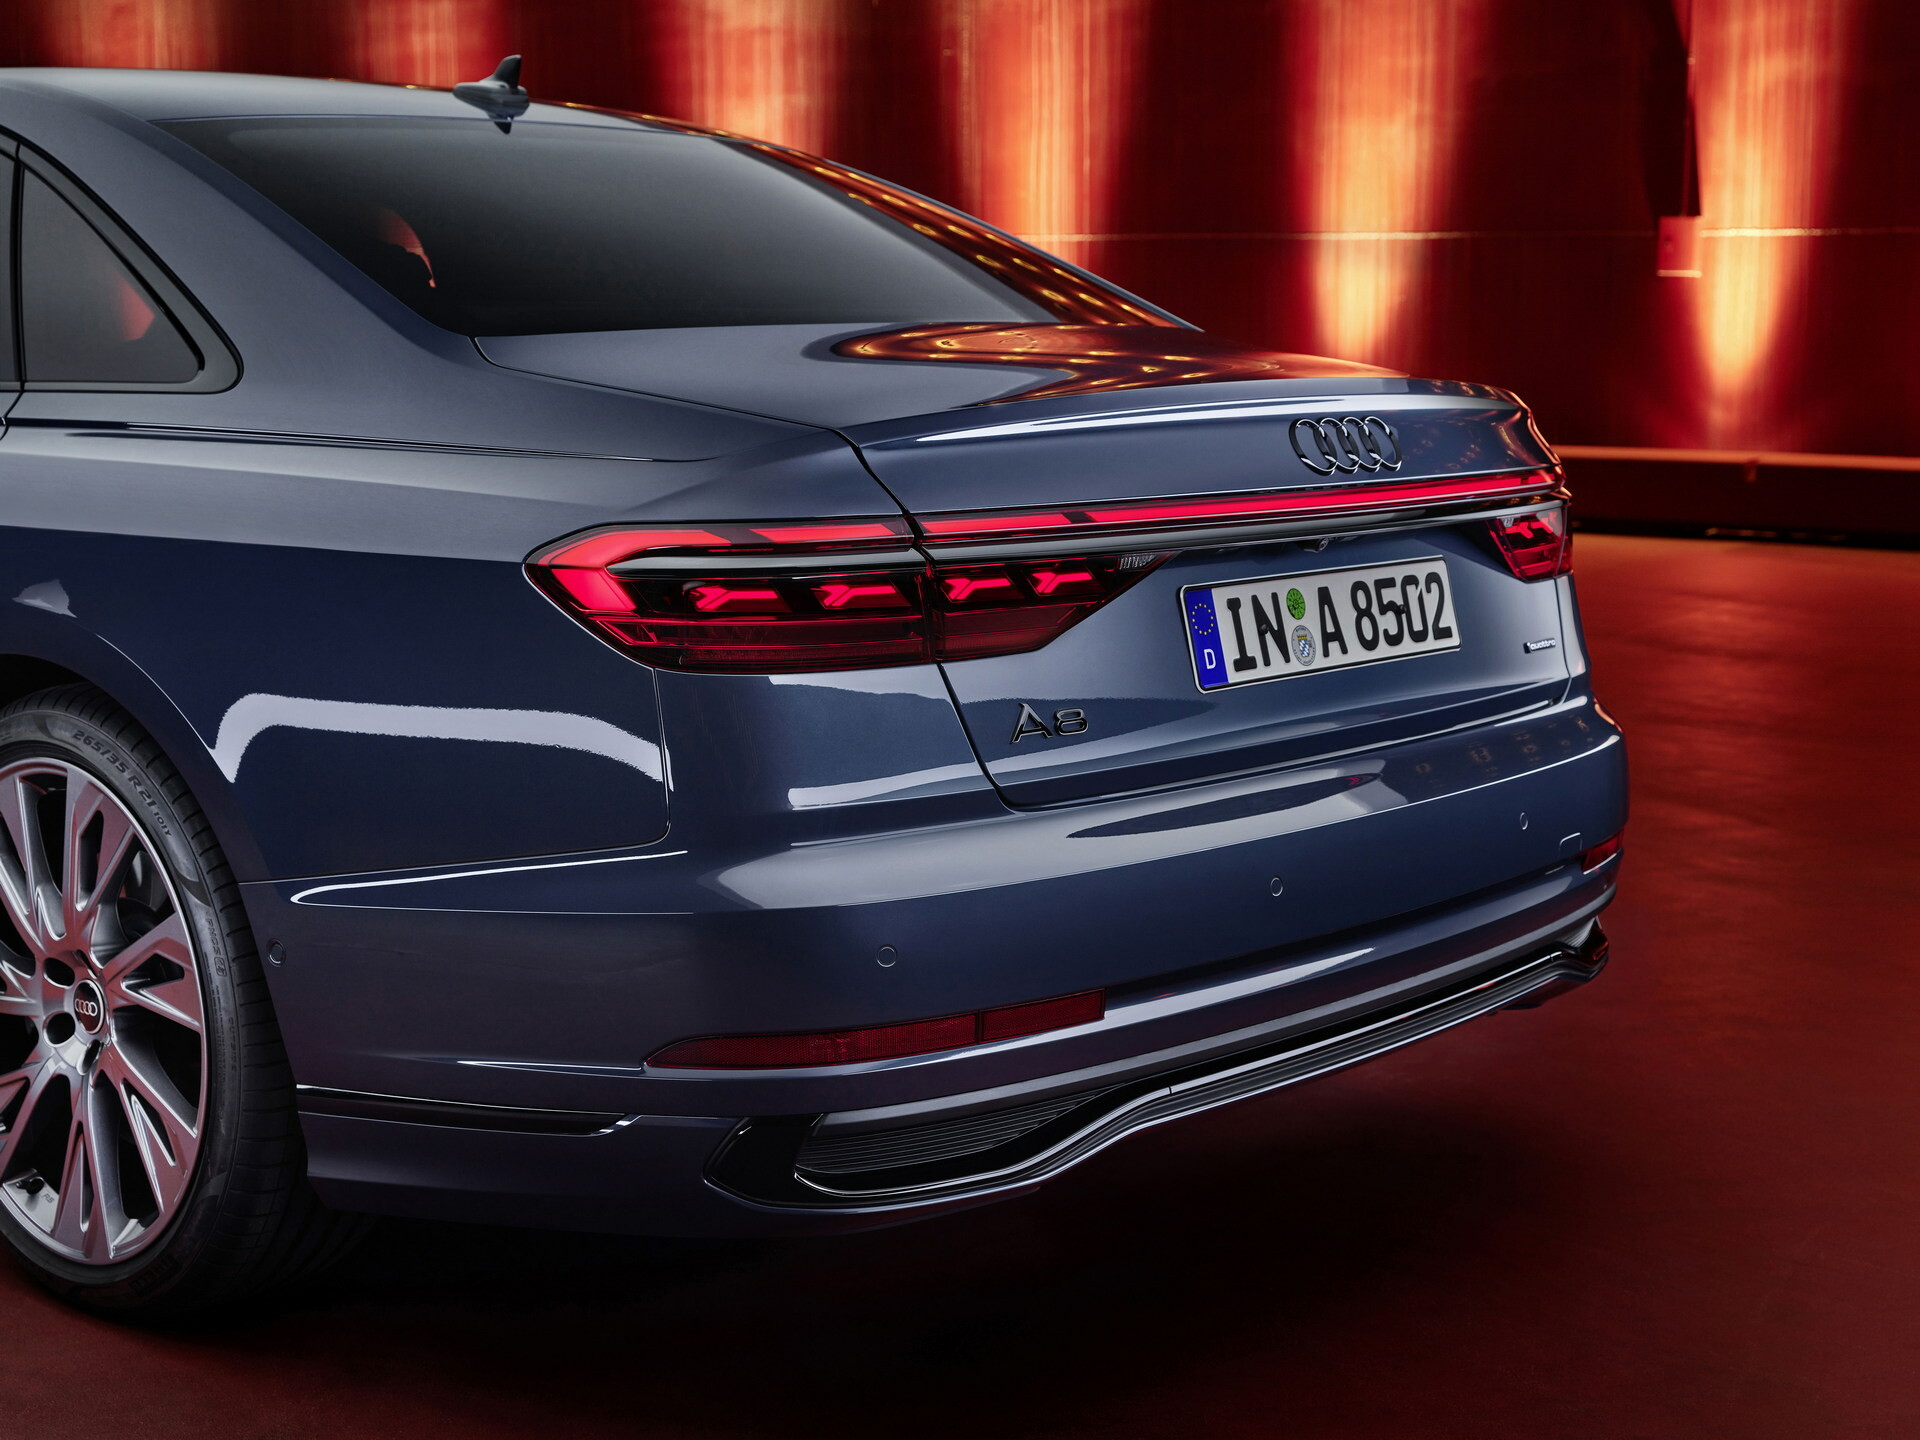 Audi A8: A large luxury saloon, sitting above the smaller A6, A4 and A3 saloon models. 1920x1440 HD Wallpaper.